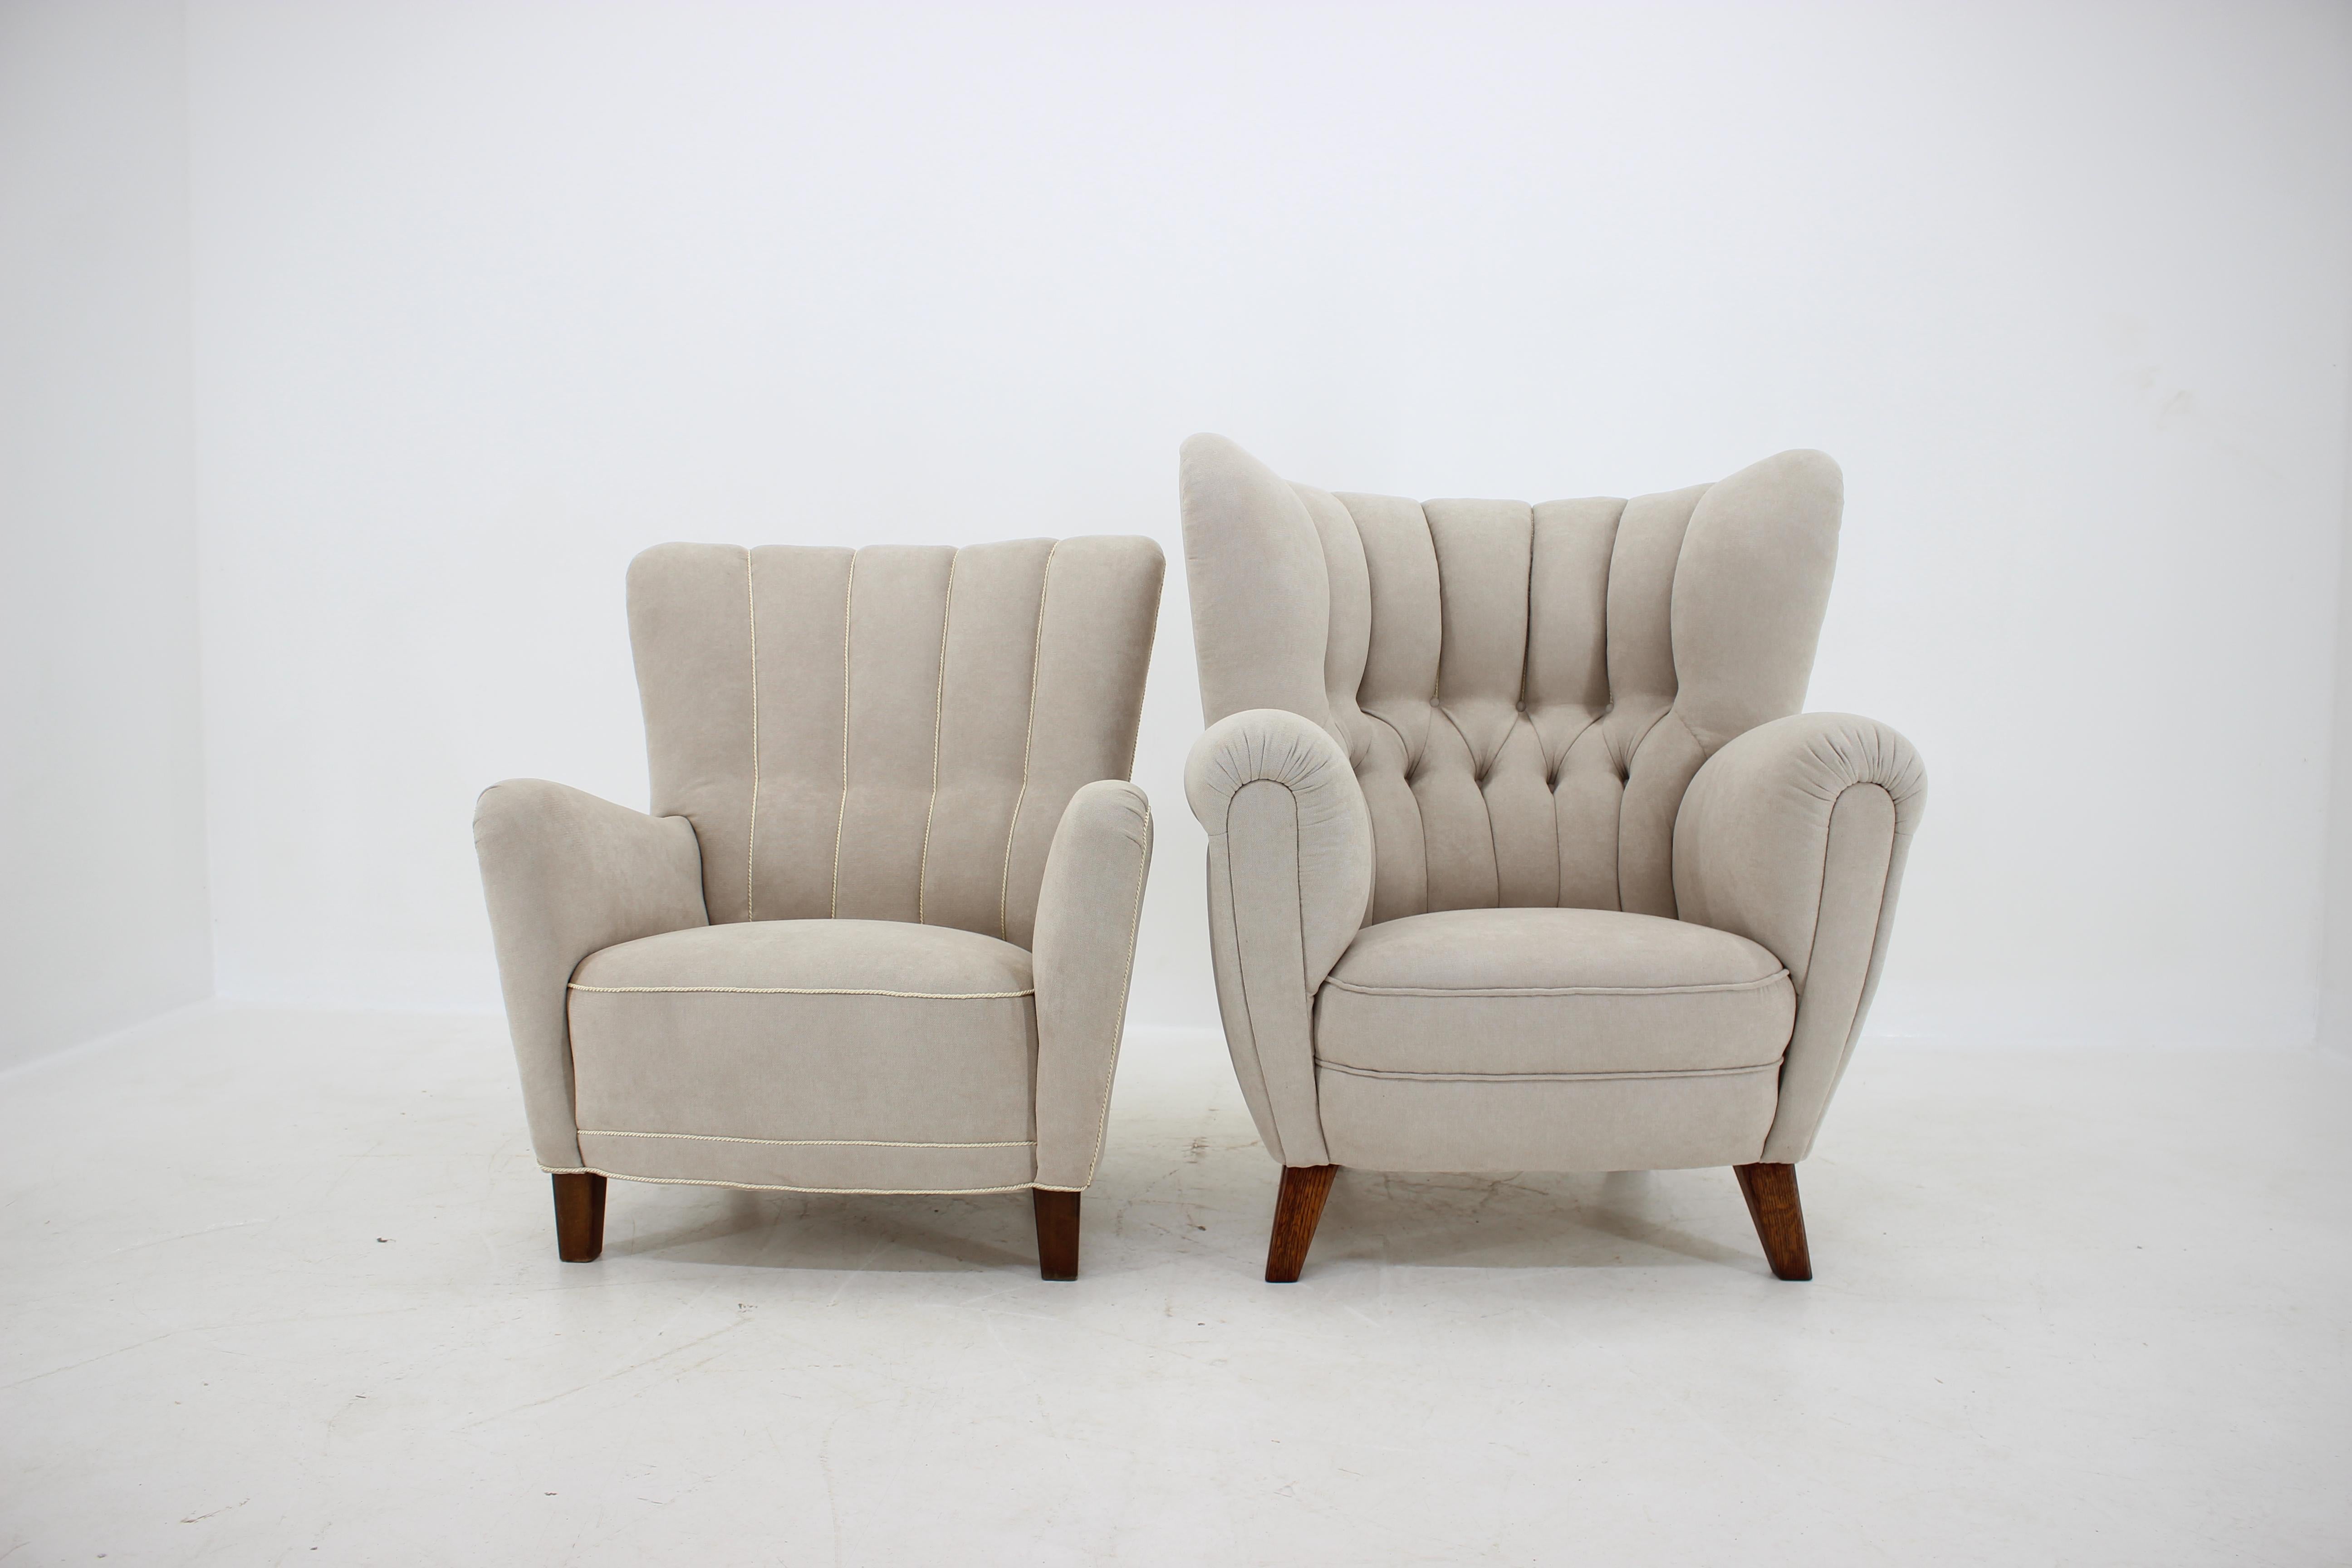 - Newly upholstered in light beige fabric upholstery 
- Wingback chair: 104 cm (seat is 40 cm) 83 cm 84 cm.